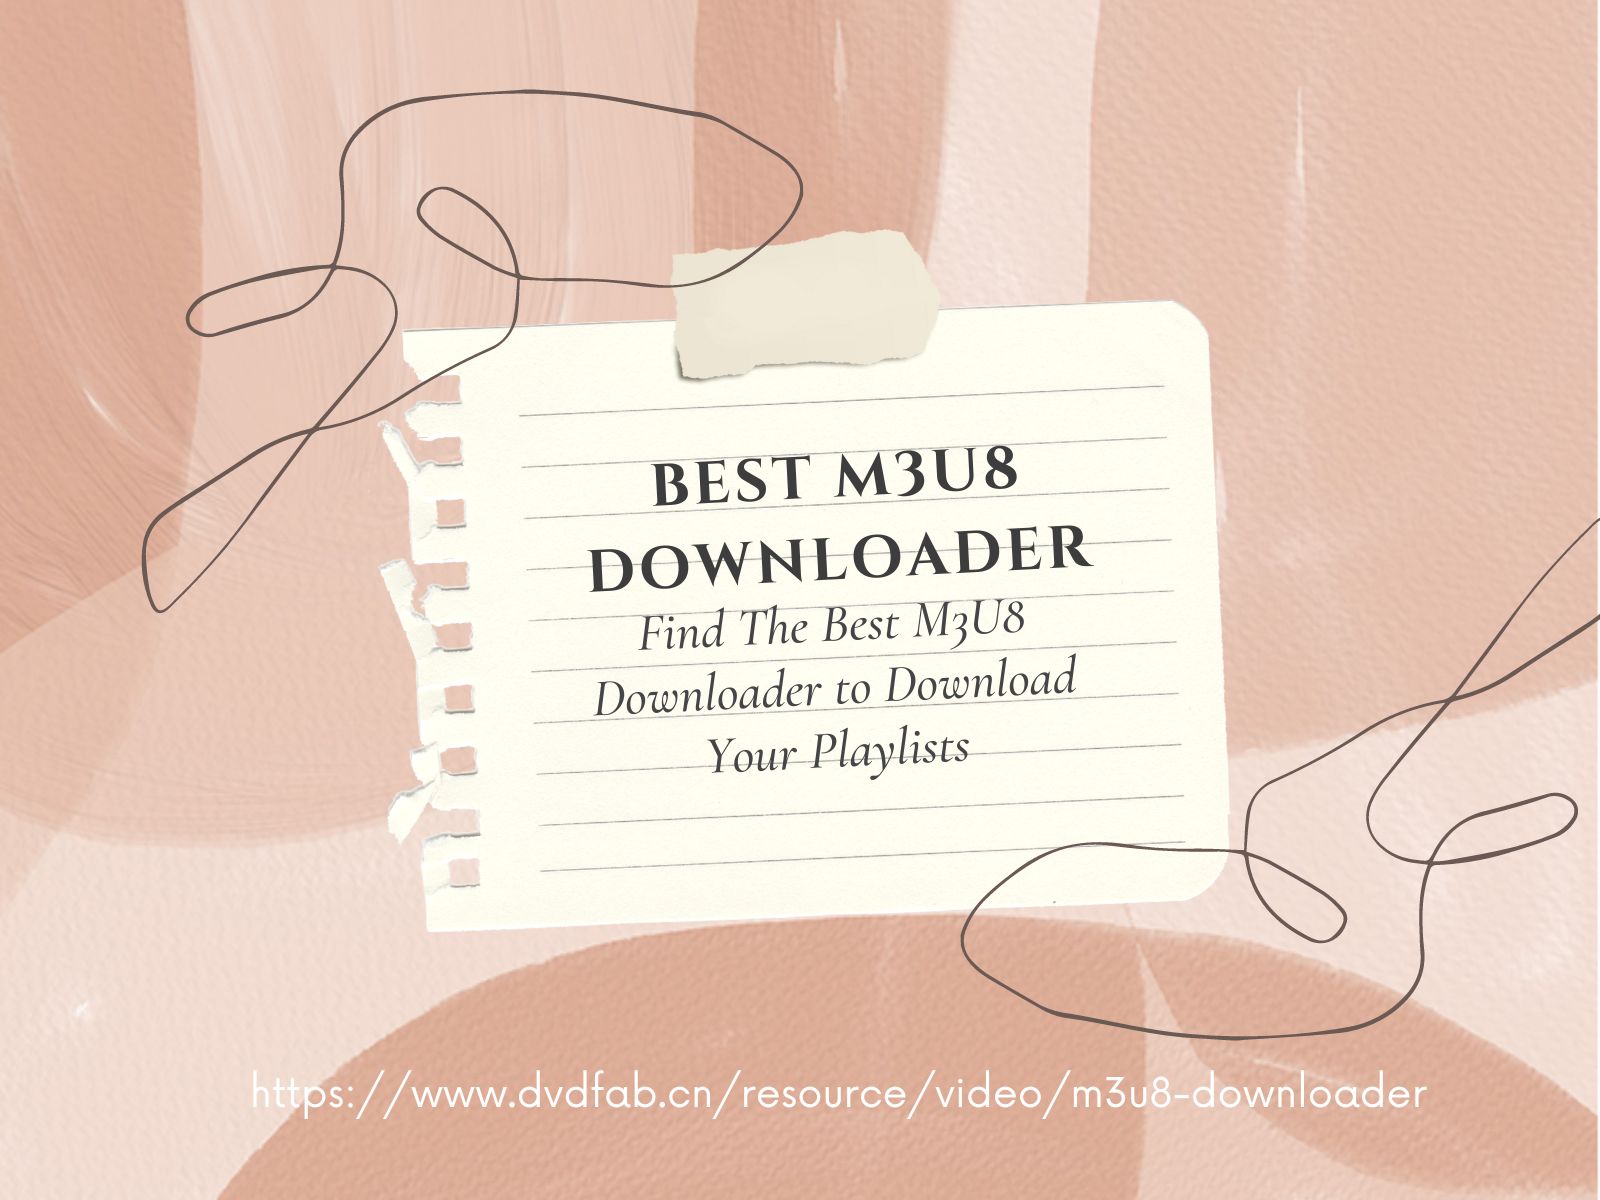 Find The Best M3U8 Downloader to Download Your Playlists